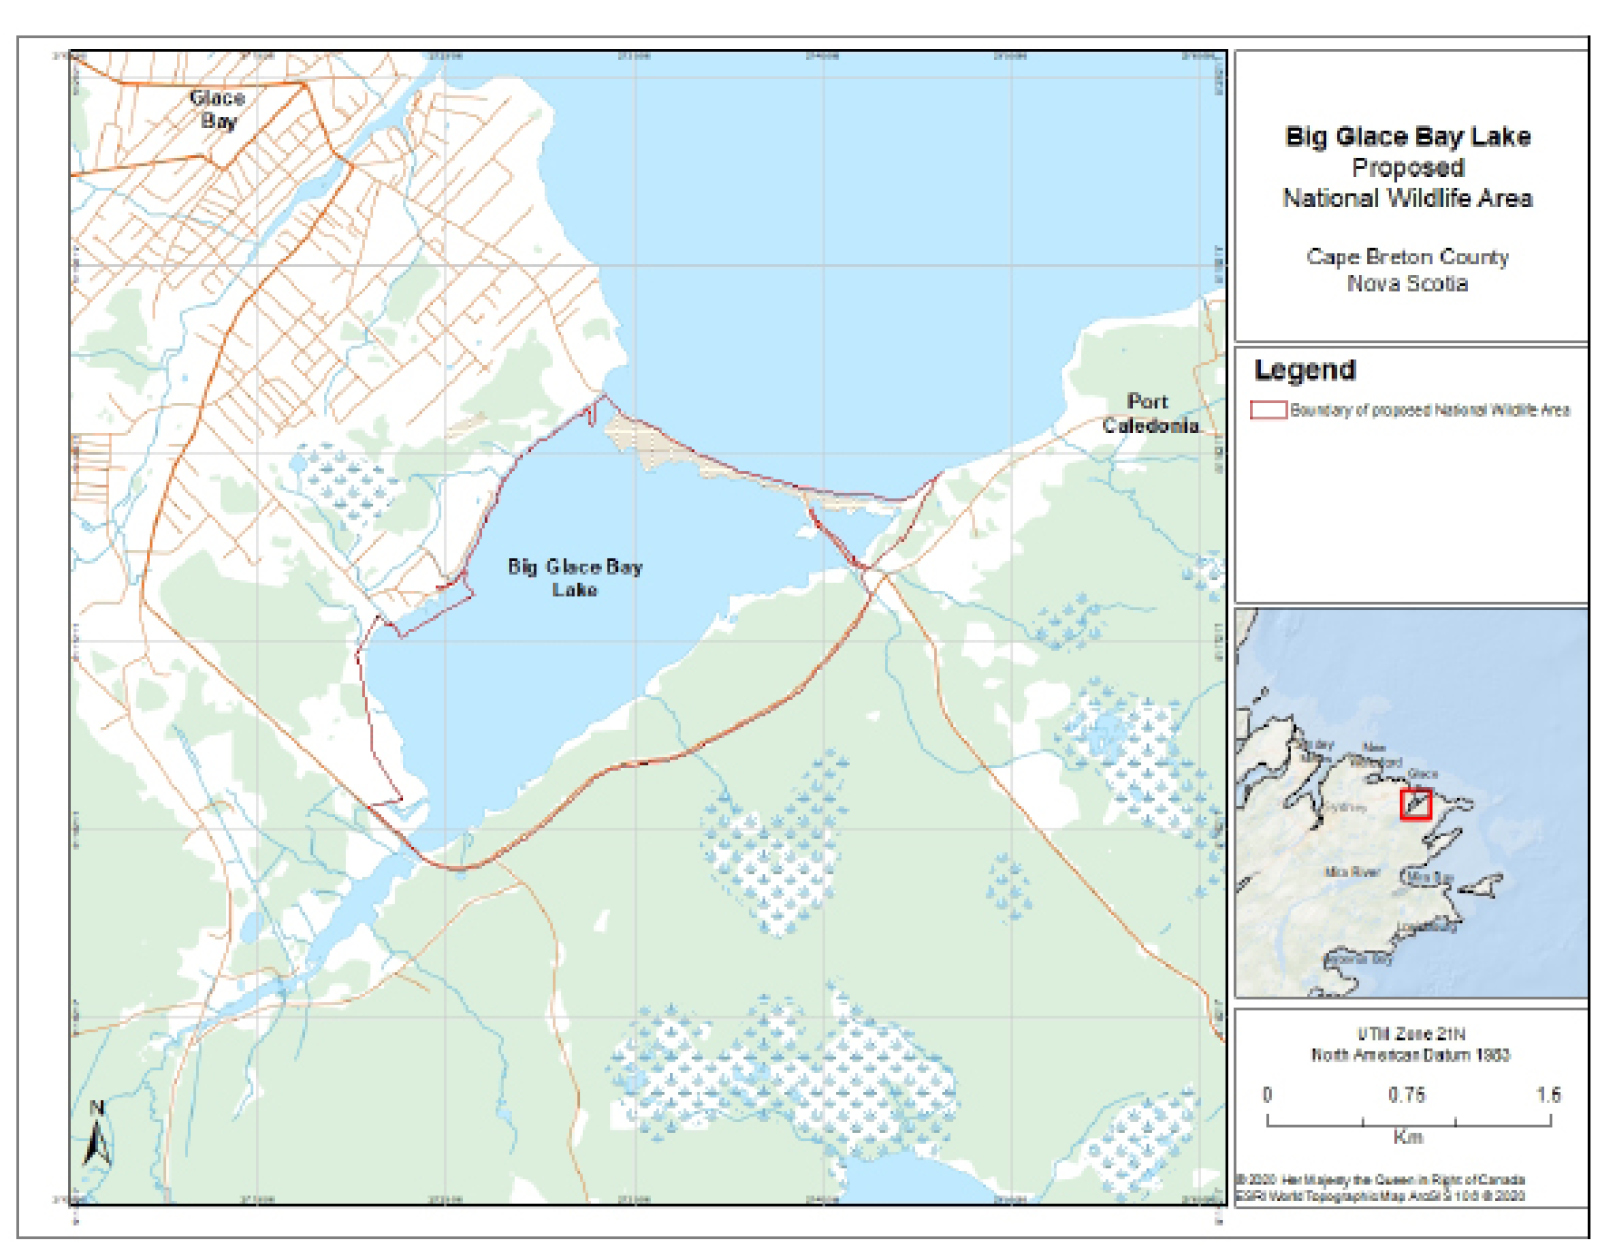 Figure 1 – Map of the Proposed Big Glace Bay Lake National Wildlife Area – Text version below the image